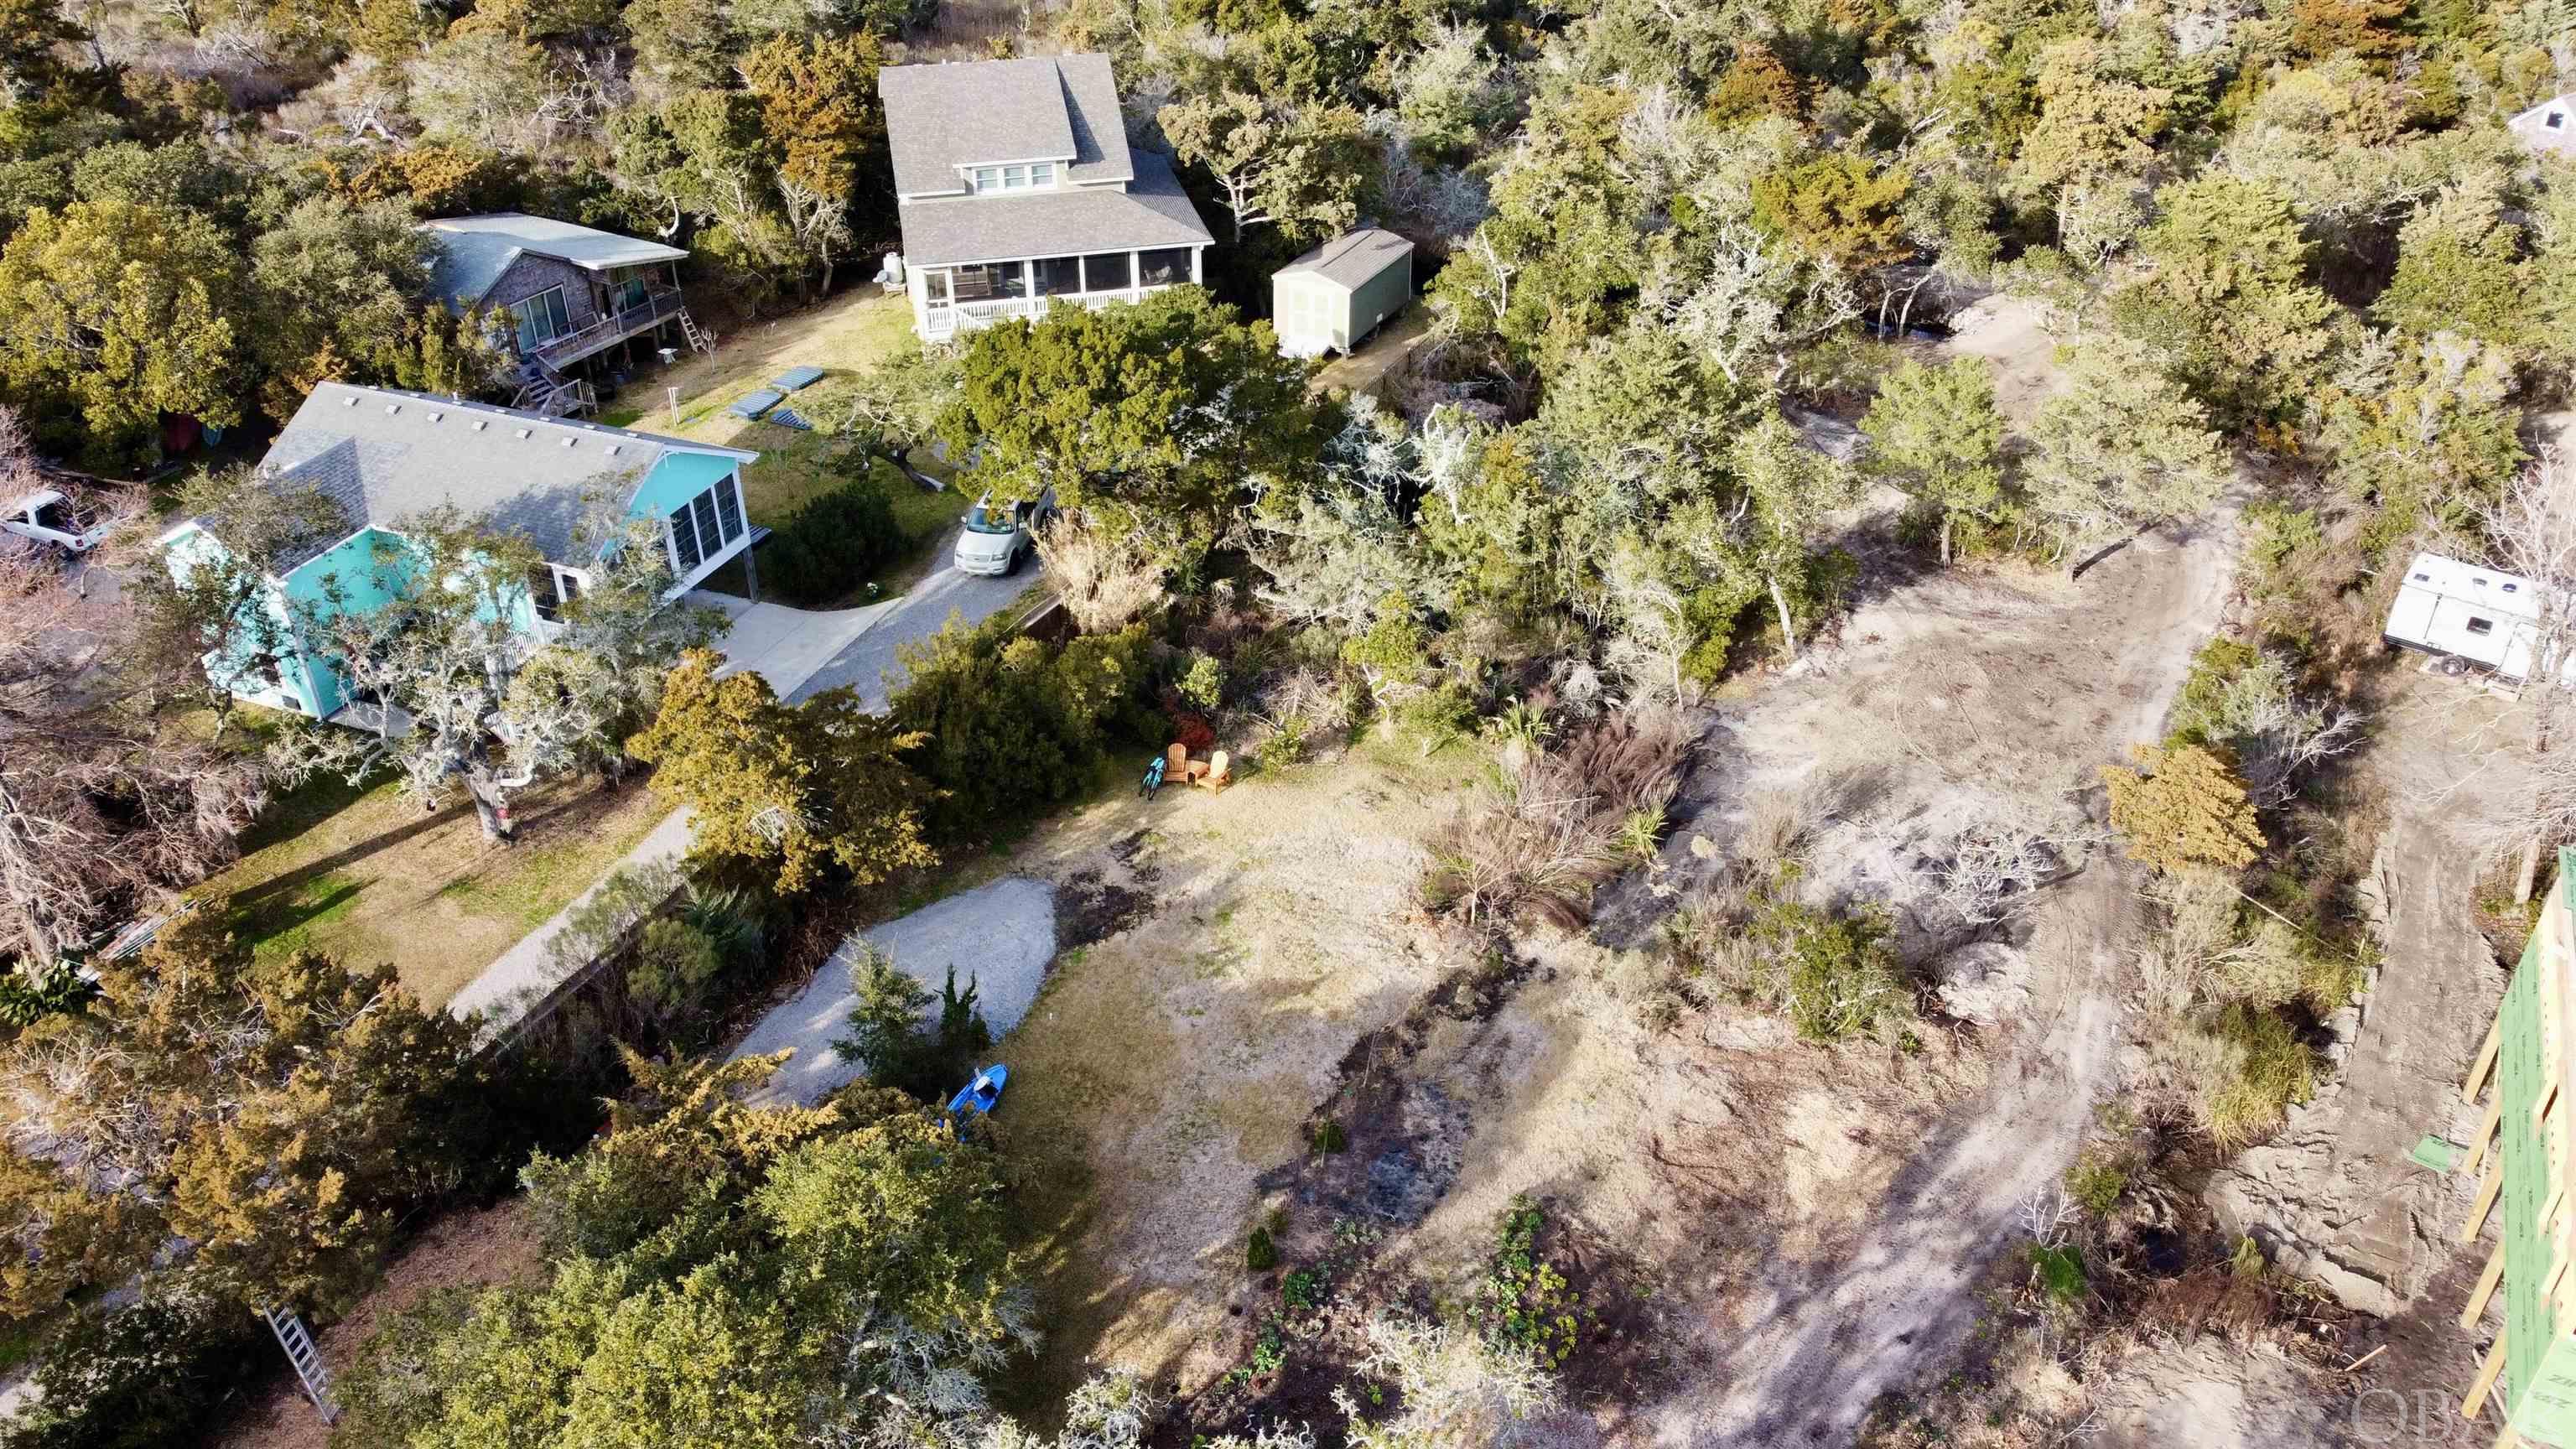 111 North Street, Ocracoke, NC 27960, ,Lots/land,For sale,North Street,124712